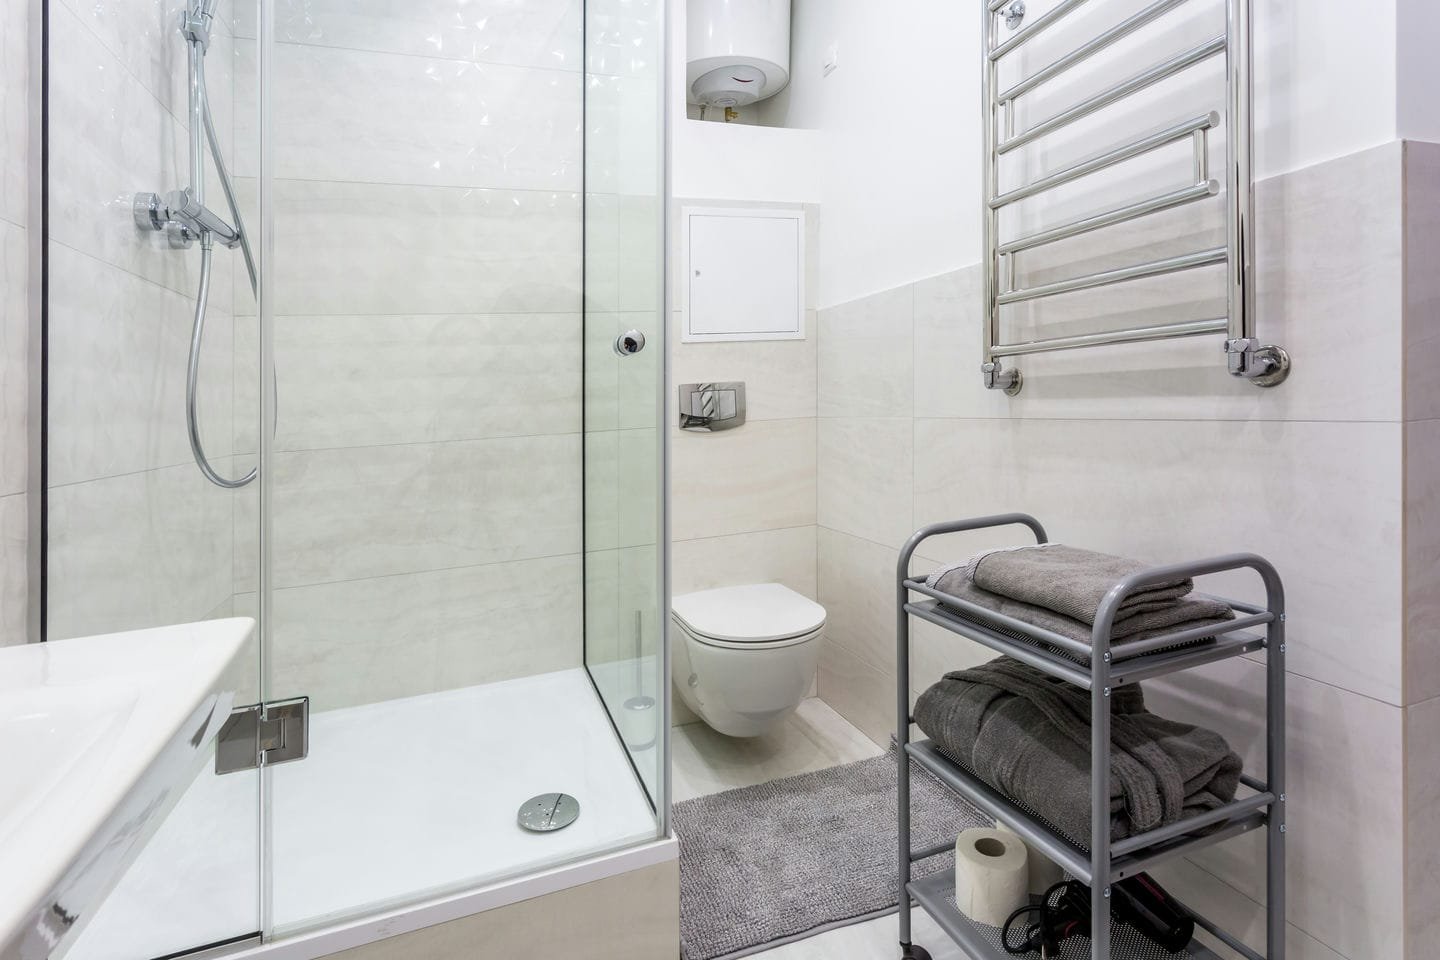 Our Flooring and Bathroom Services in Bayside